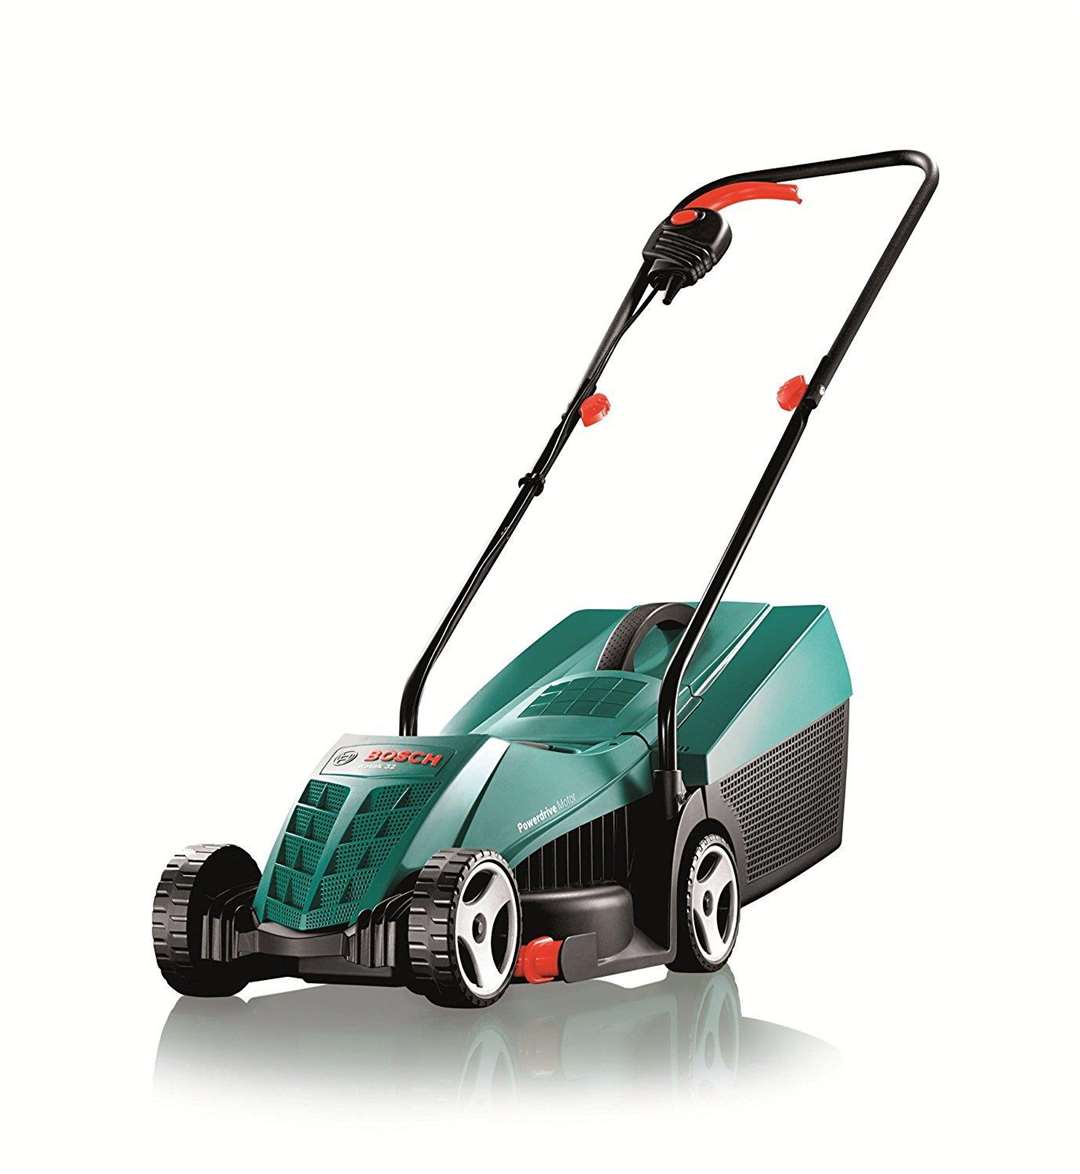 A lawnmower was stolen. Stock image